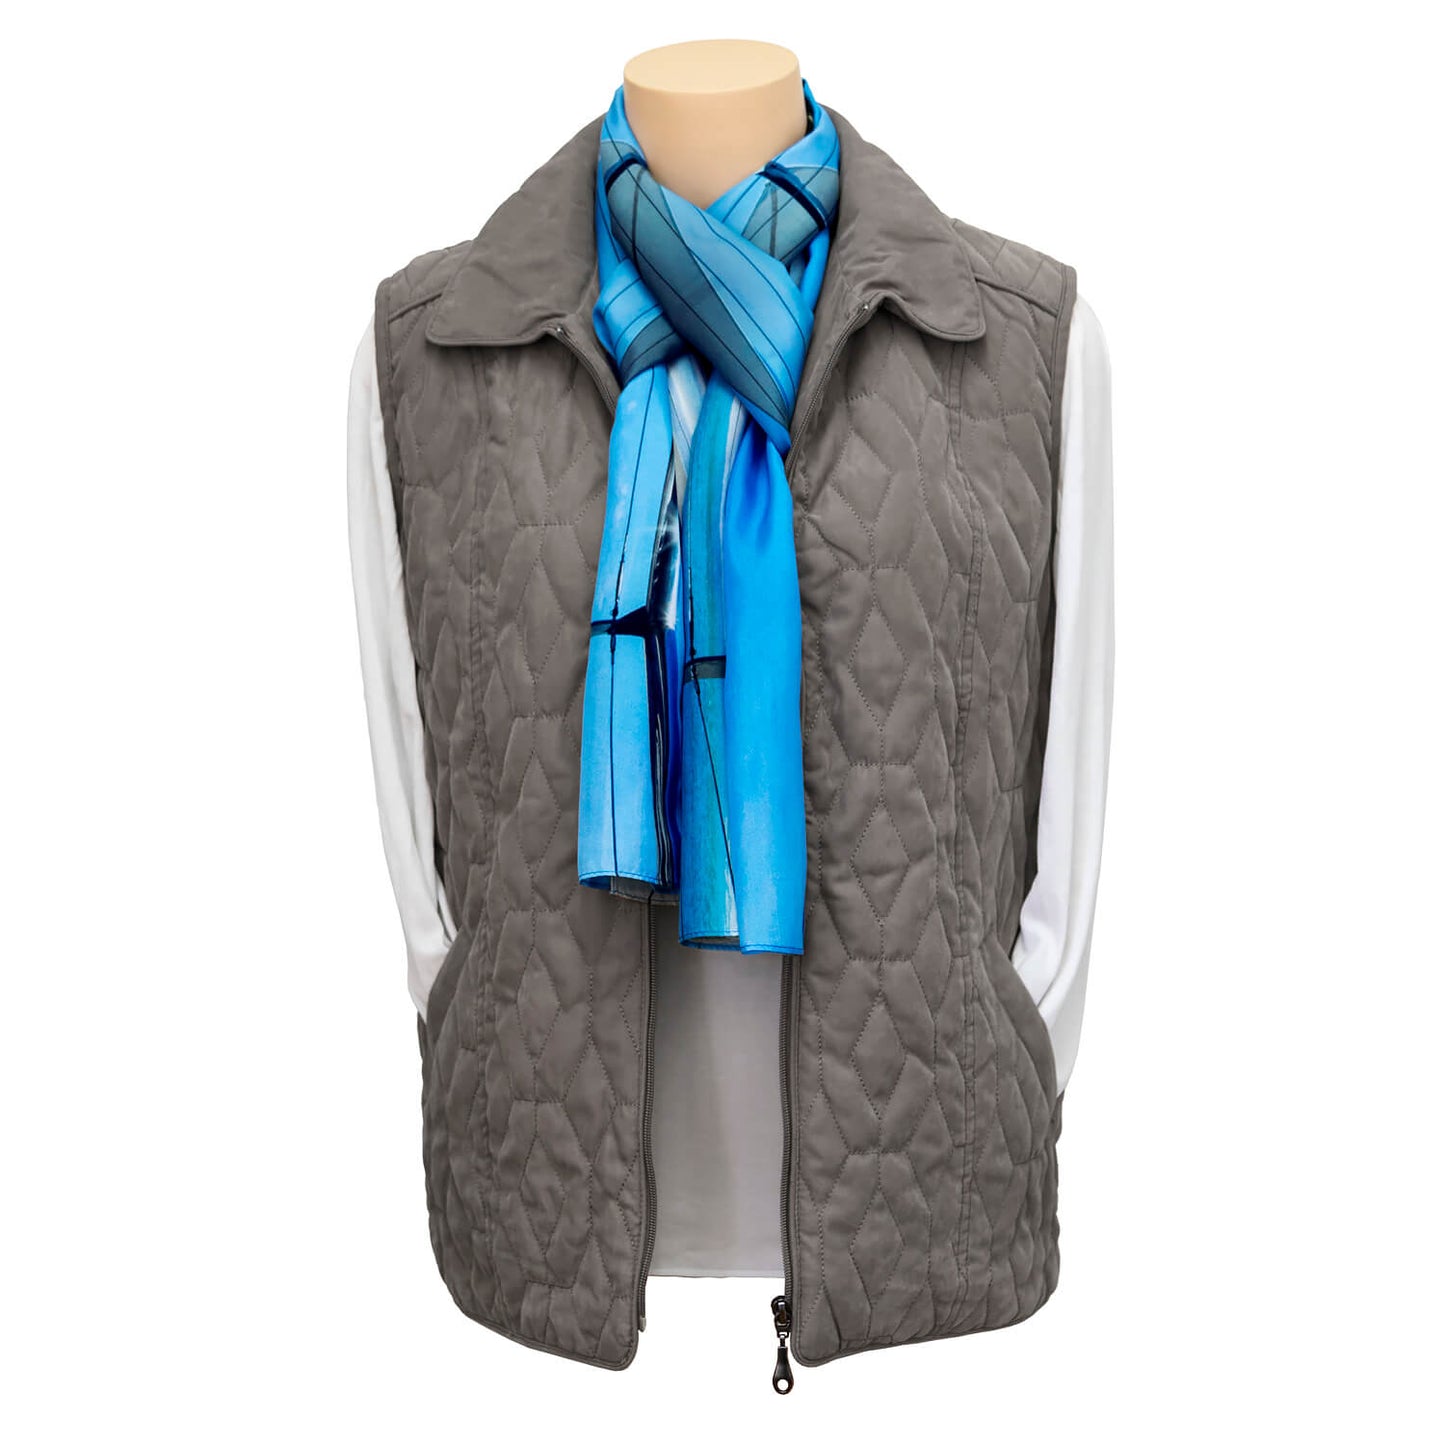 mooloo view blue silk scarf with taupe vest and white top